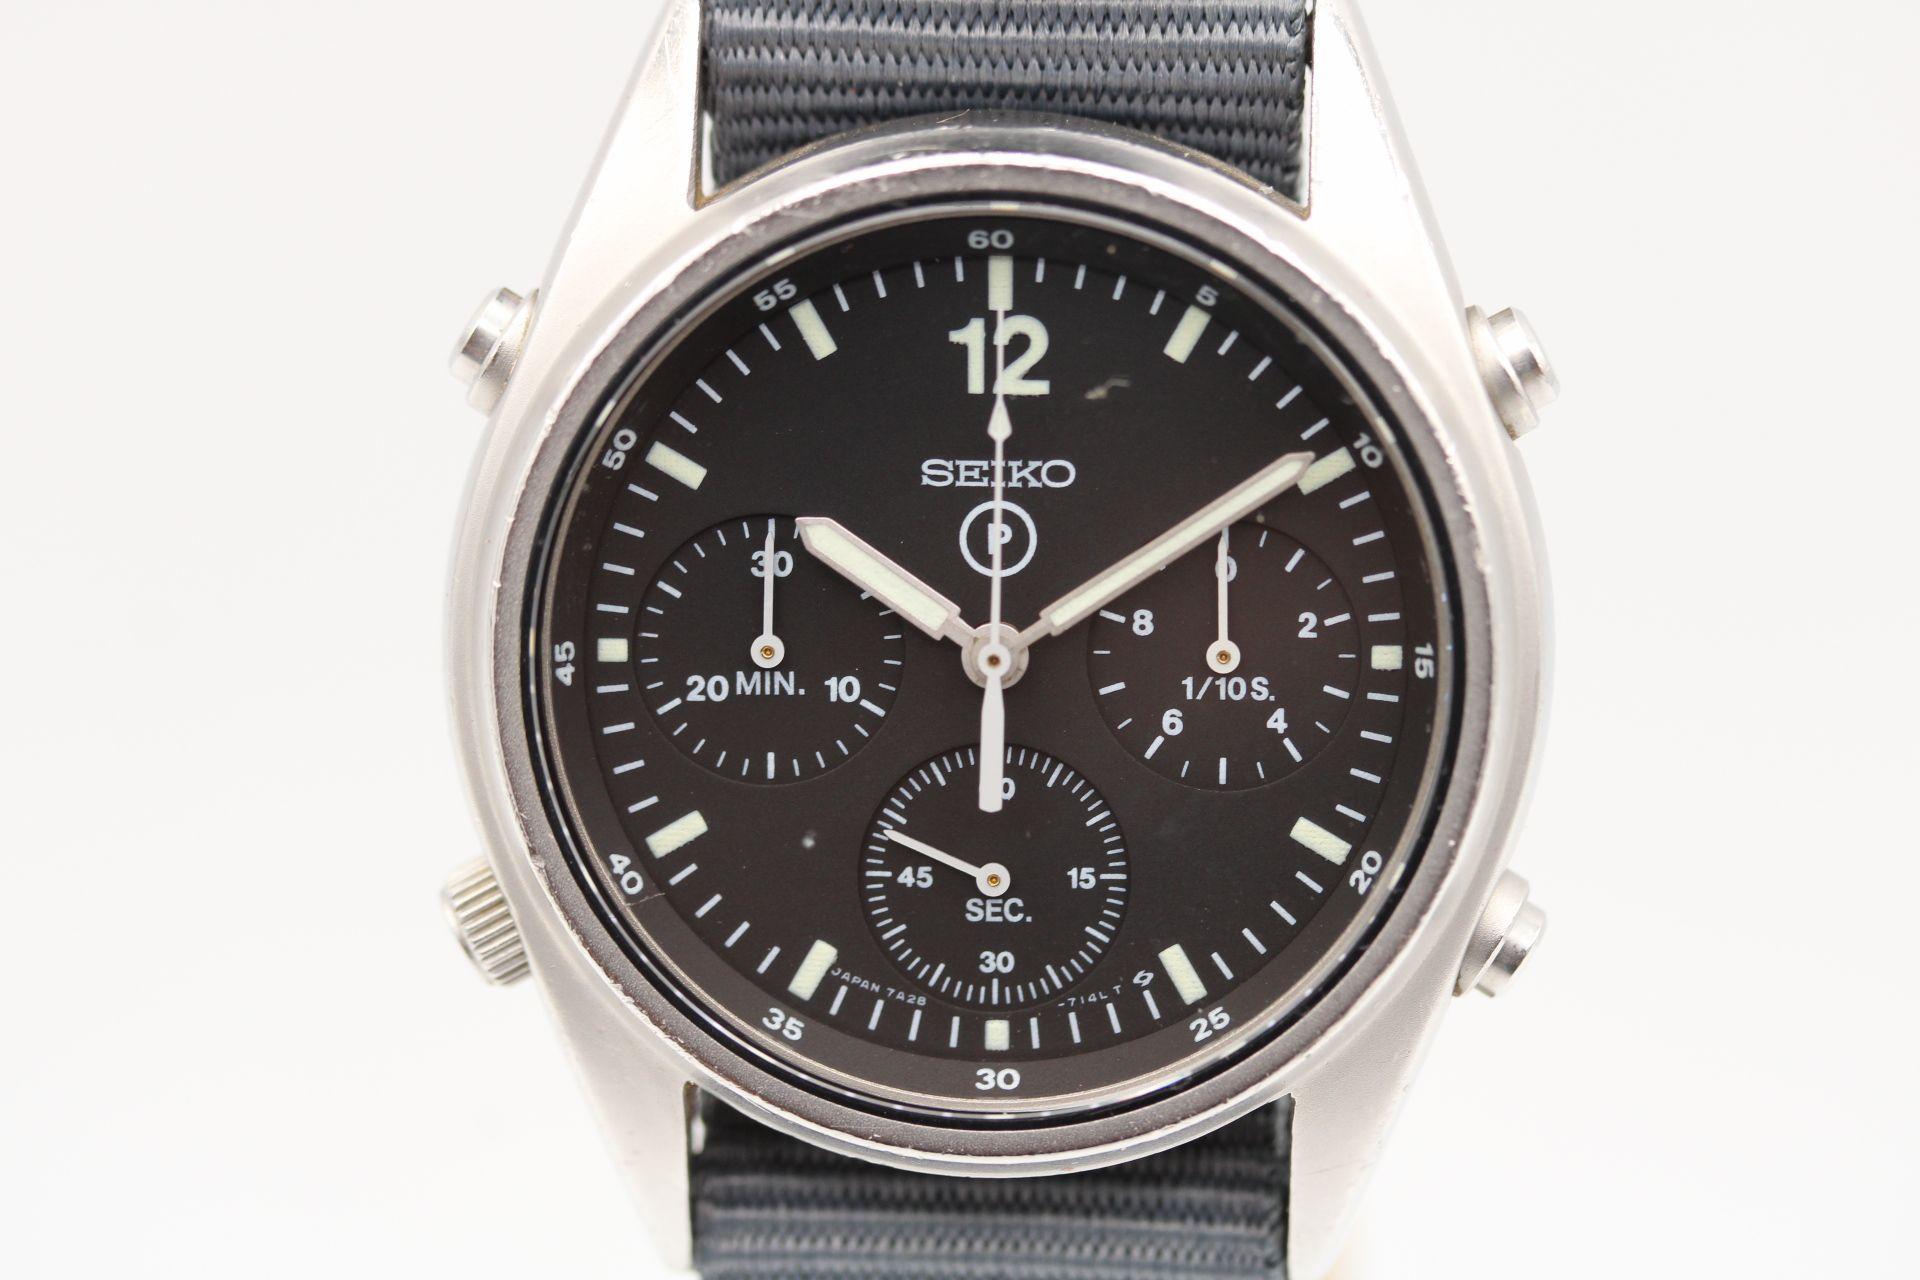 Seiko Chronograph Gen 1 Military Raf Chronograph 1990 In Good Condition For Sale In London, GB